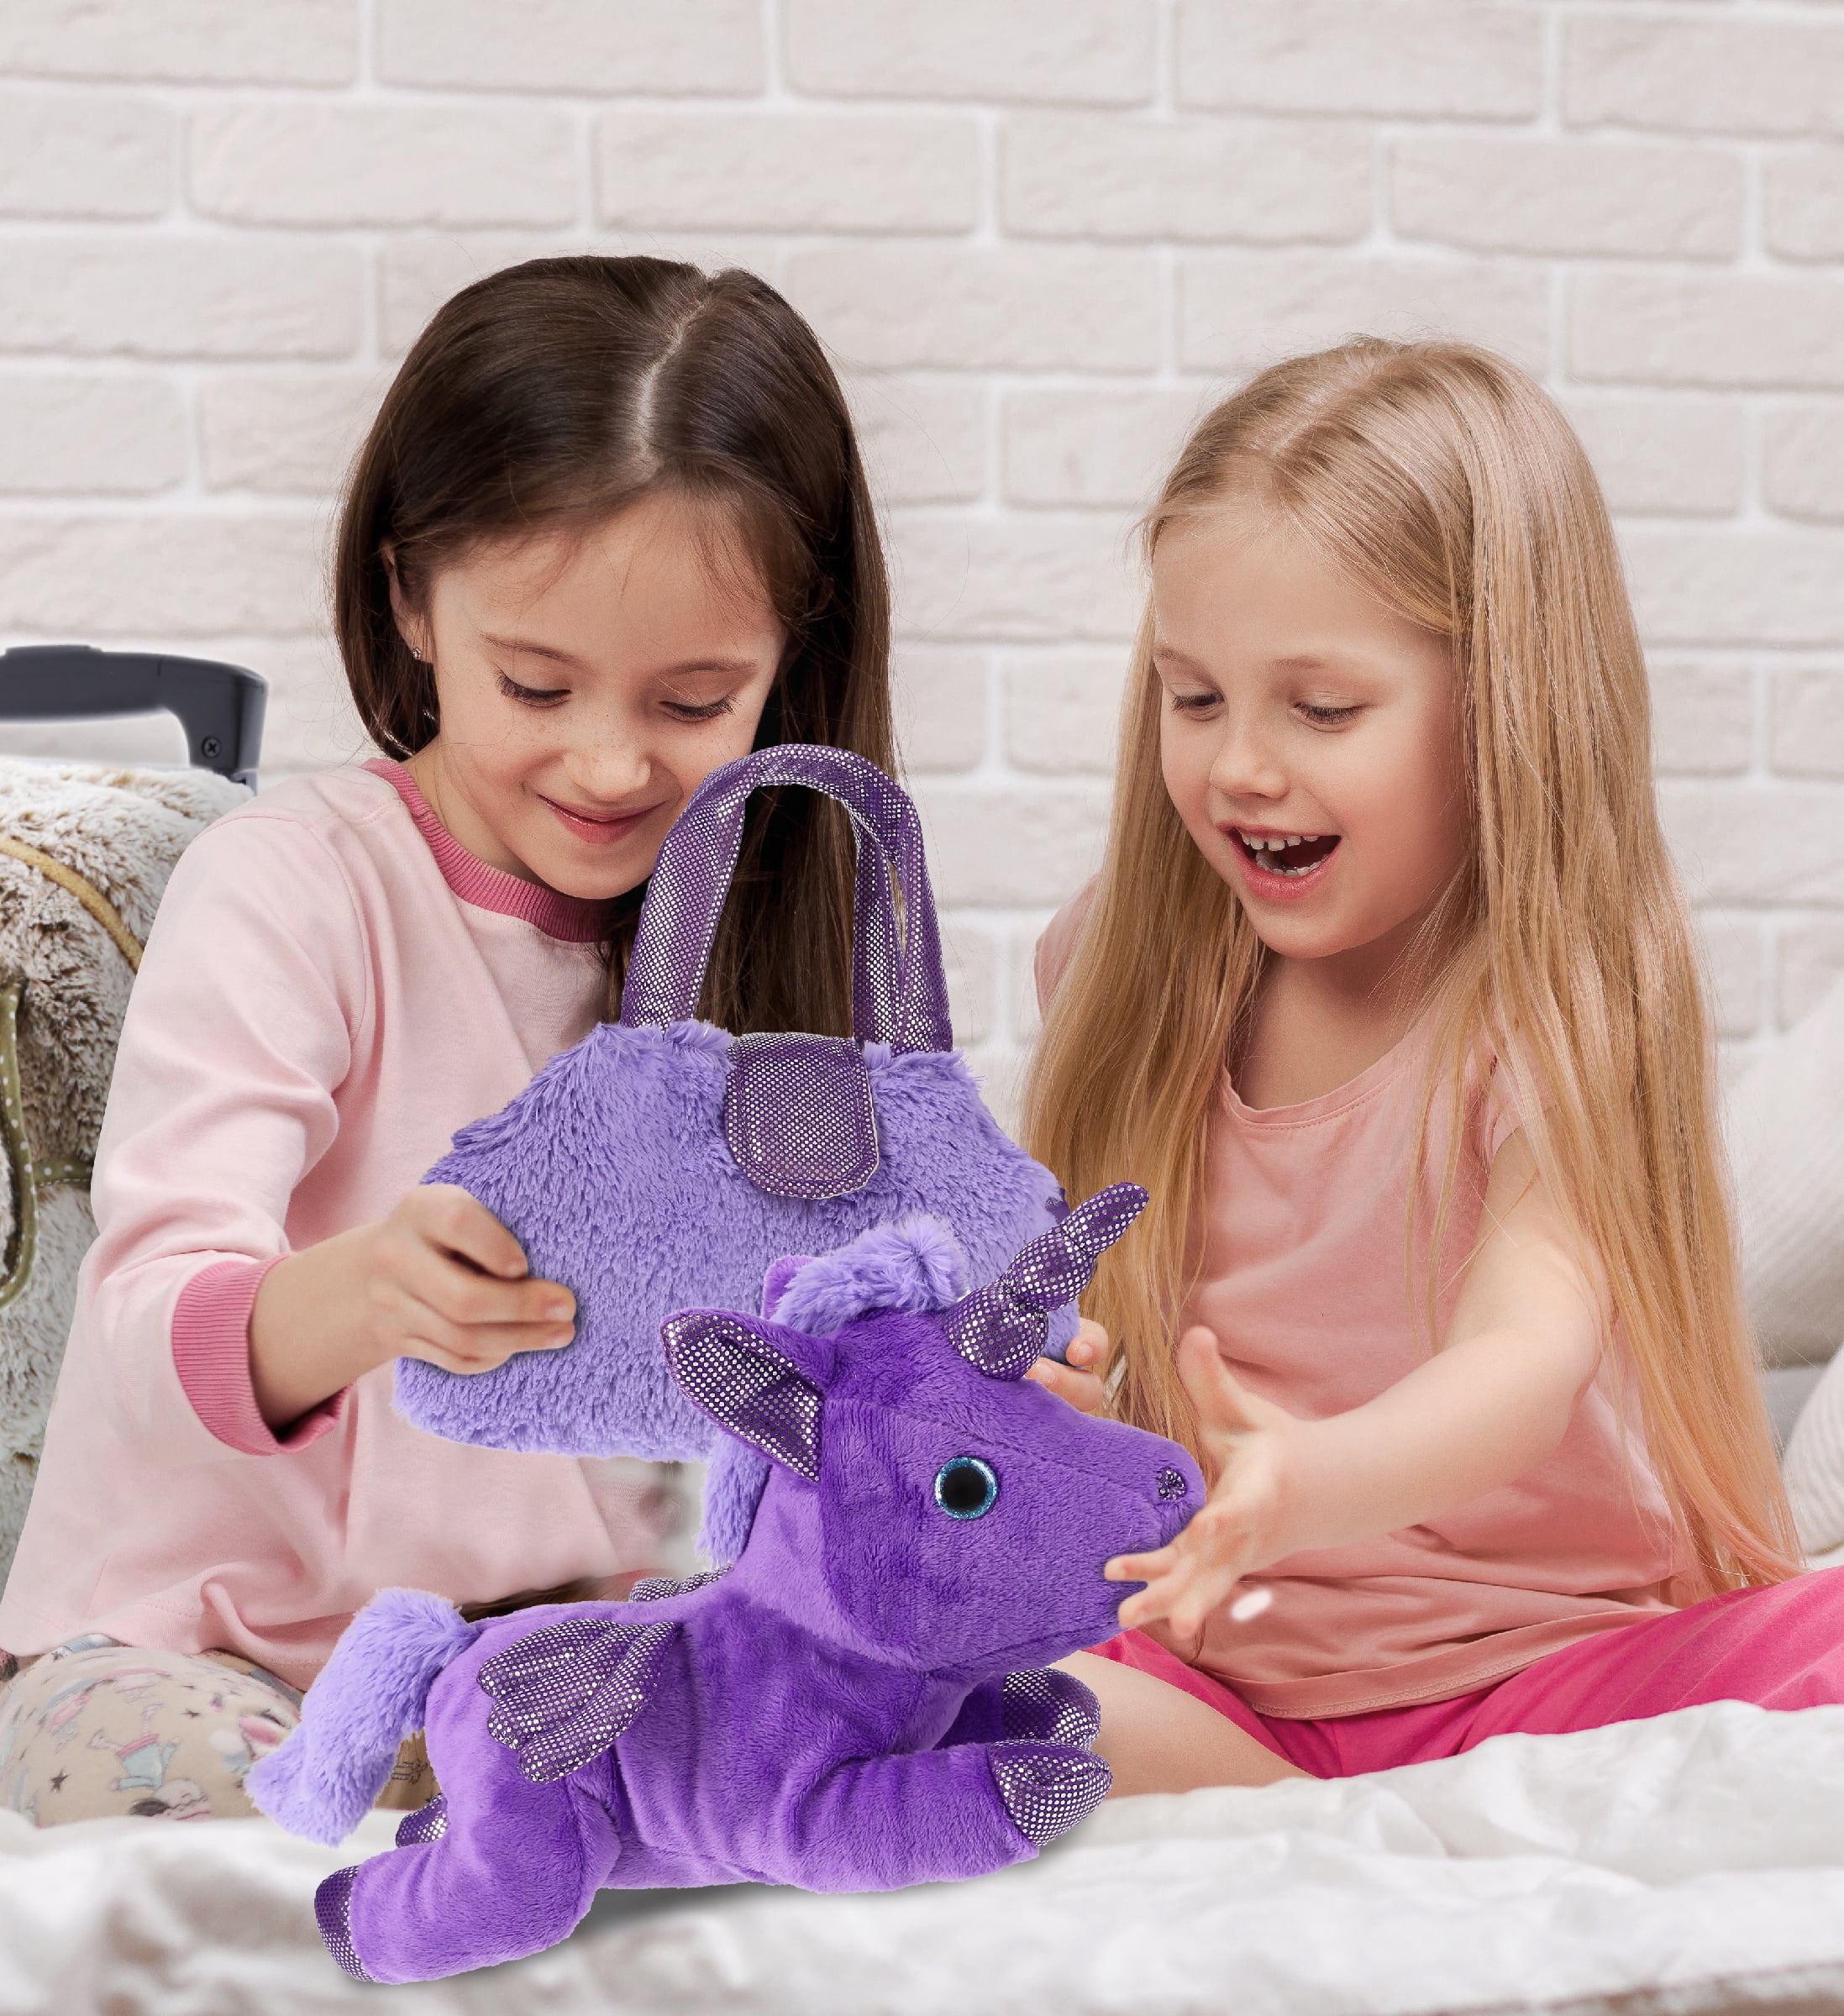 Buy Unicorn Pouch, Coin Pouch, Purse Hanging, Pouch with Hook, Return Gifts  for Girls, Unicorn Keychain, Unicorn Gift Items (Fuchsia) at Amazon.in